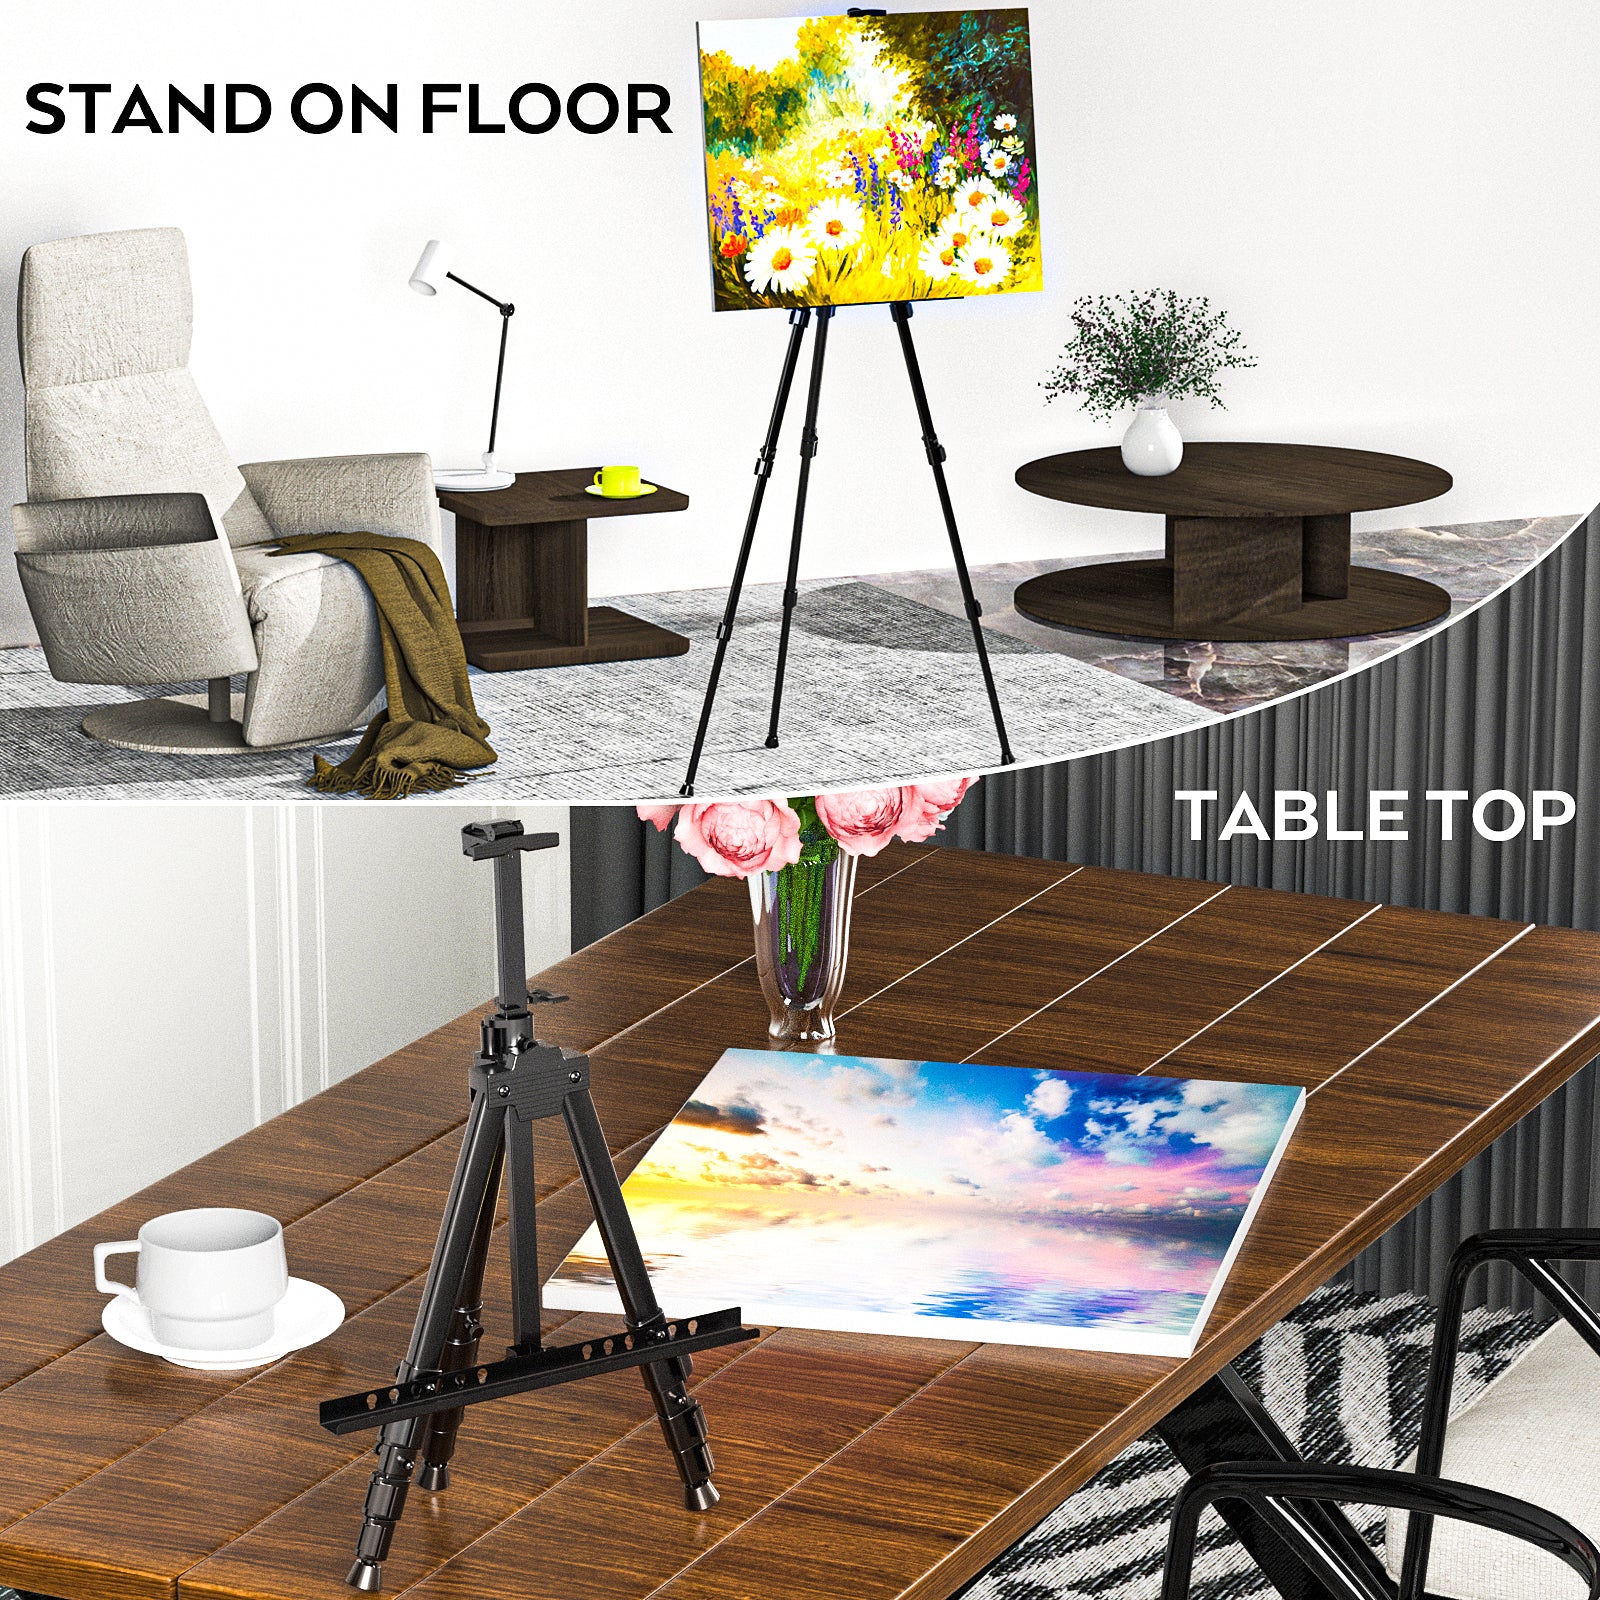 Display Easel Stand Posters Easel Holder Displaying Art Painting